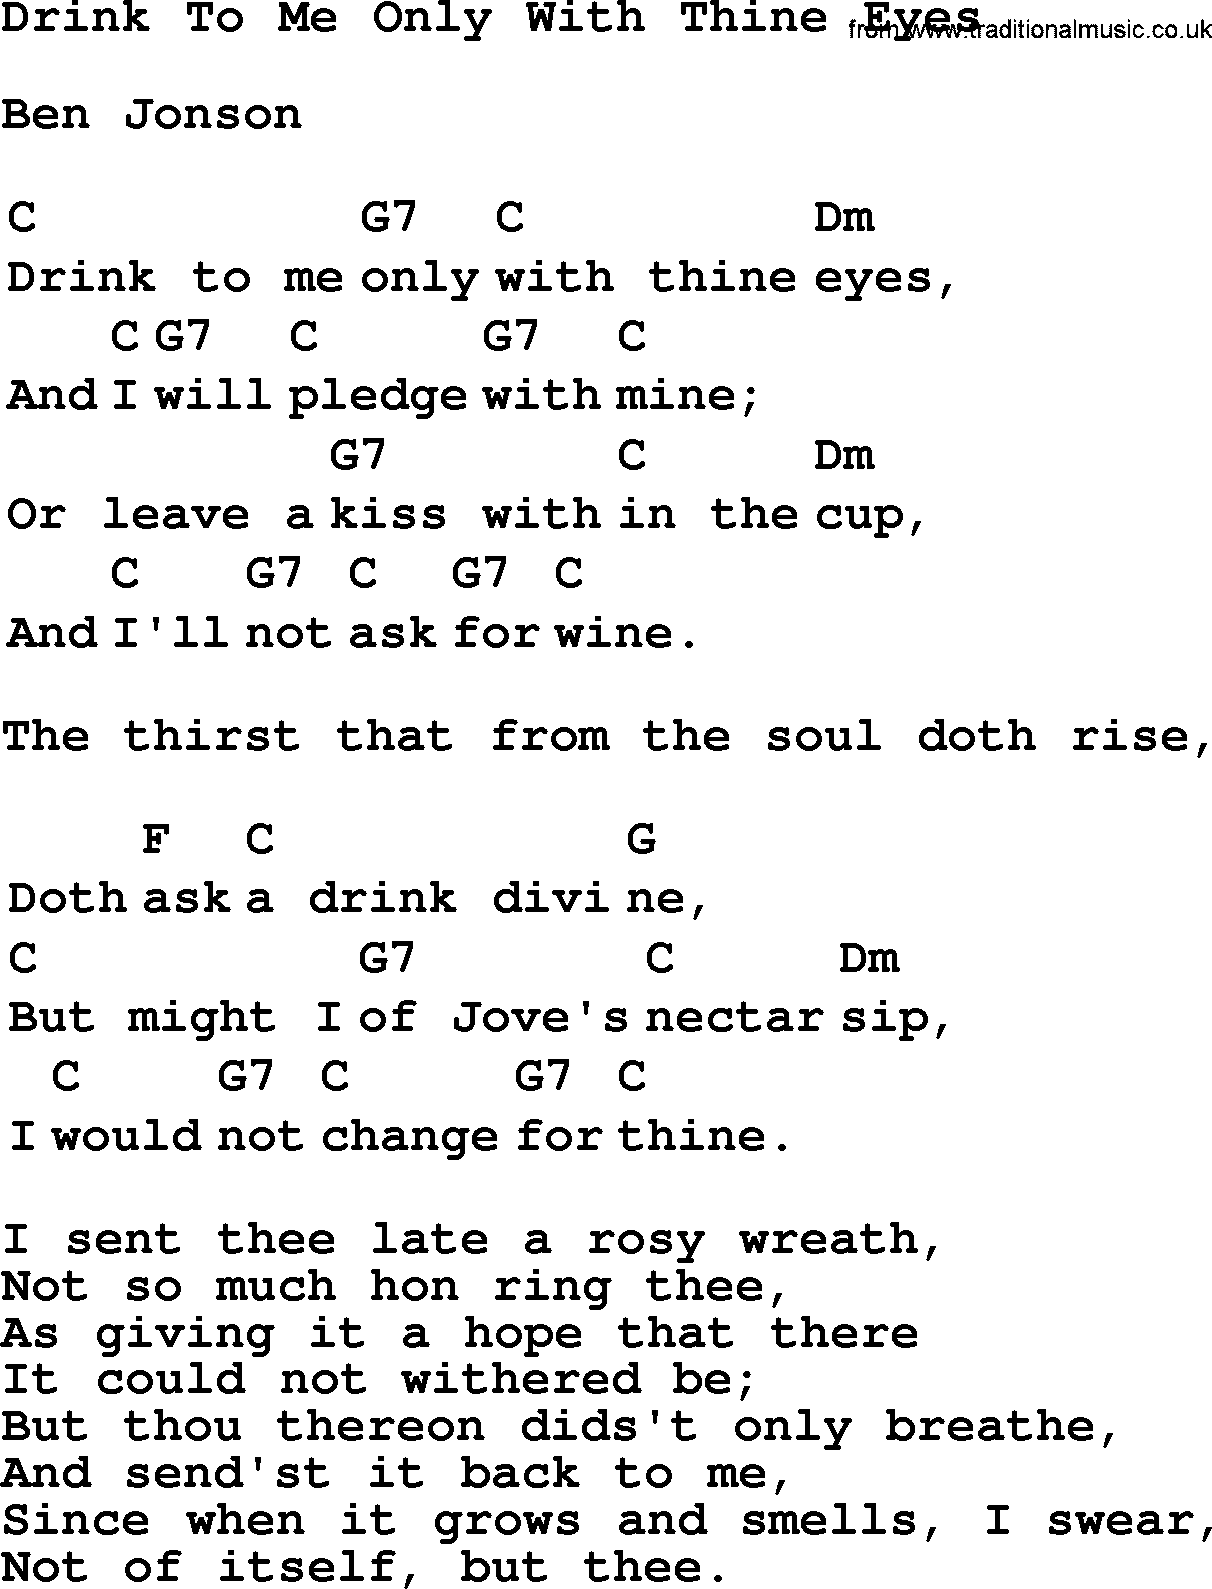 Top 1000 Most Popular Folk and Old-time Songs: Drink To Me Only With Thine Eyes, lyrics and chords